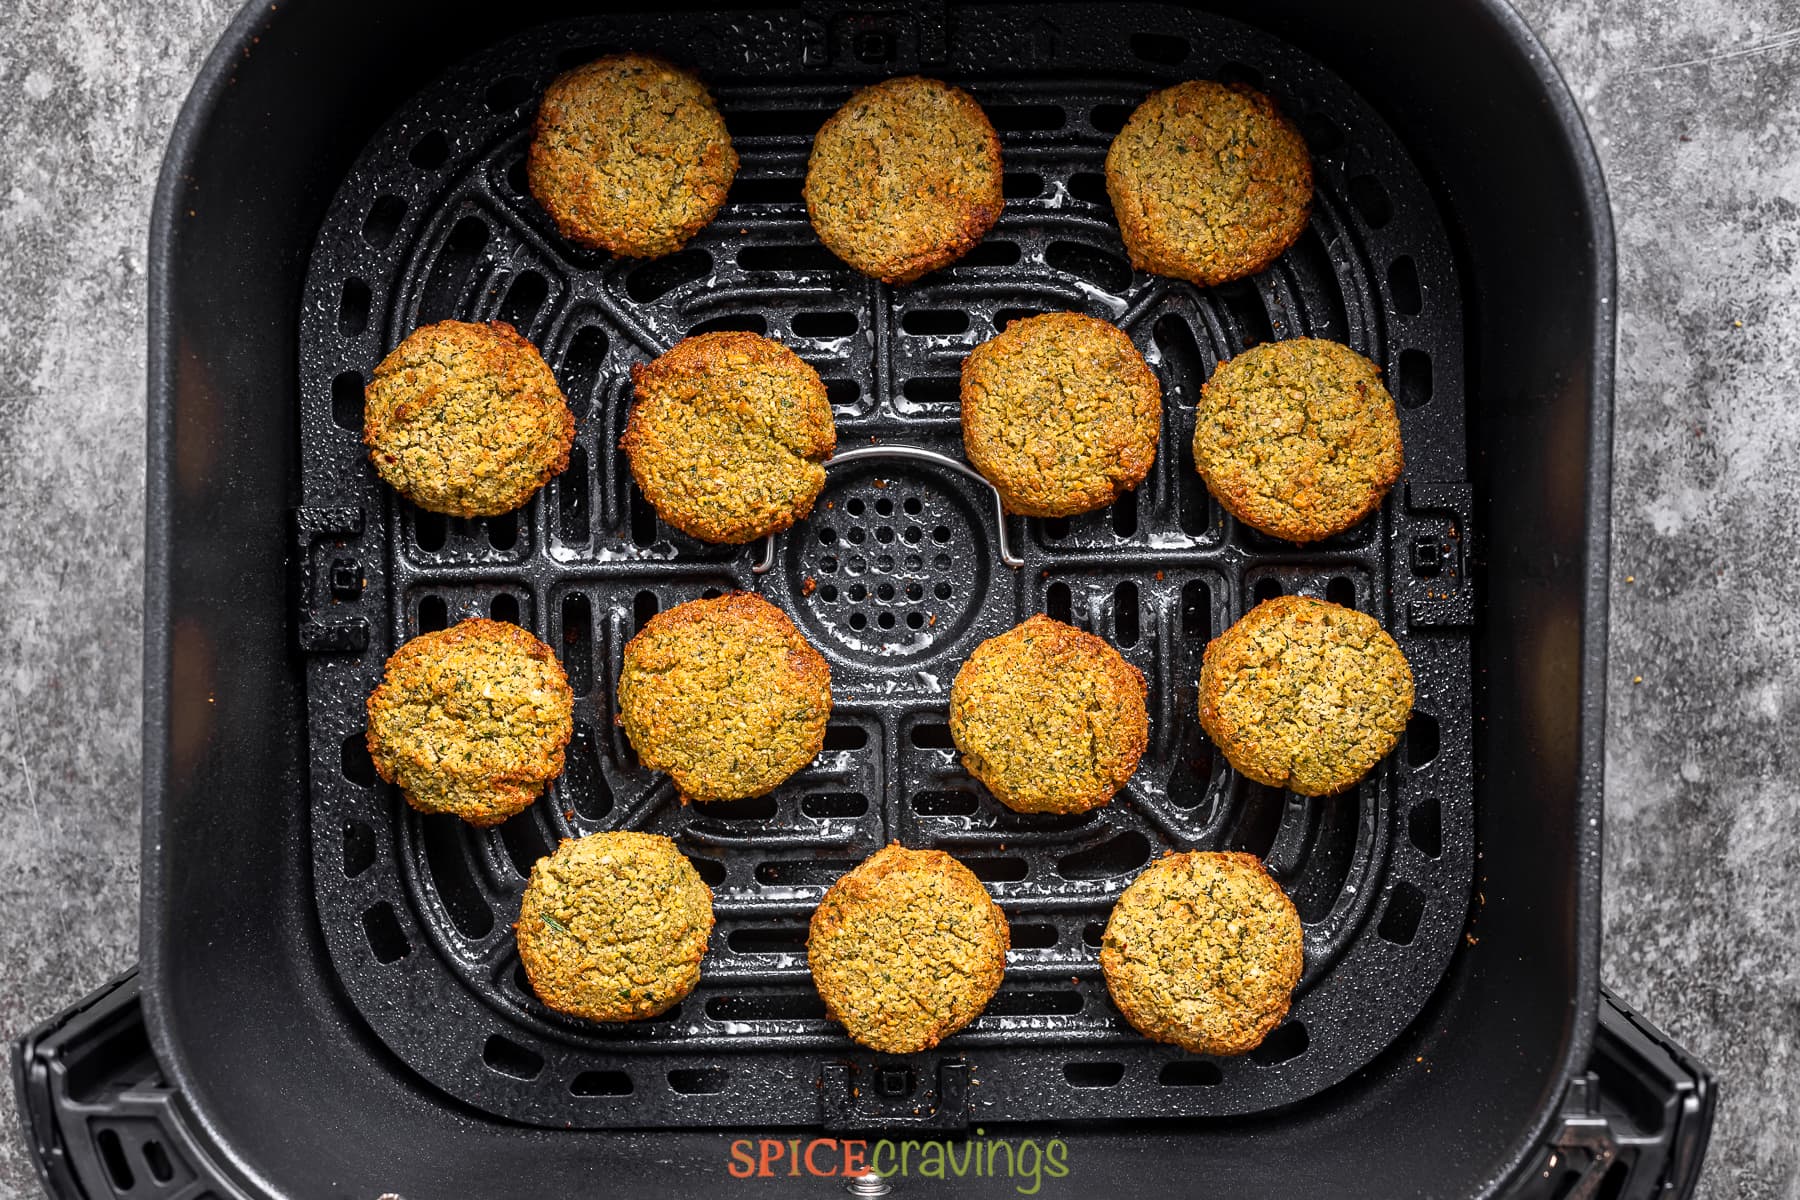 finished falafel patties in the air fryer basket